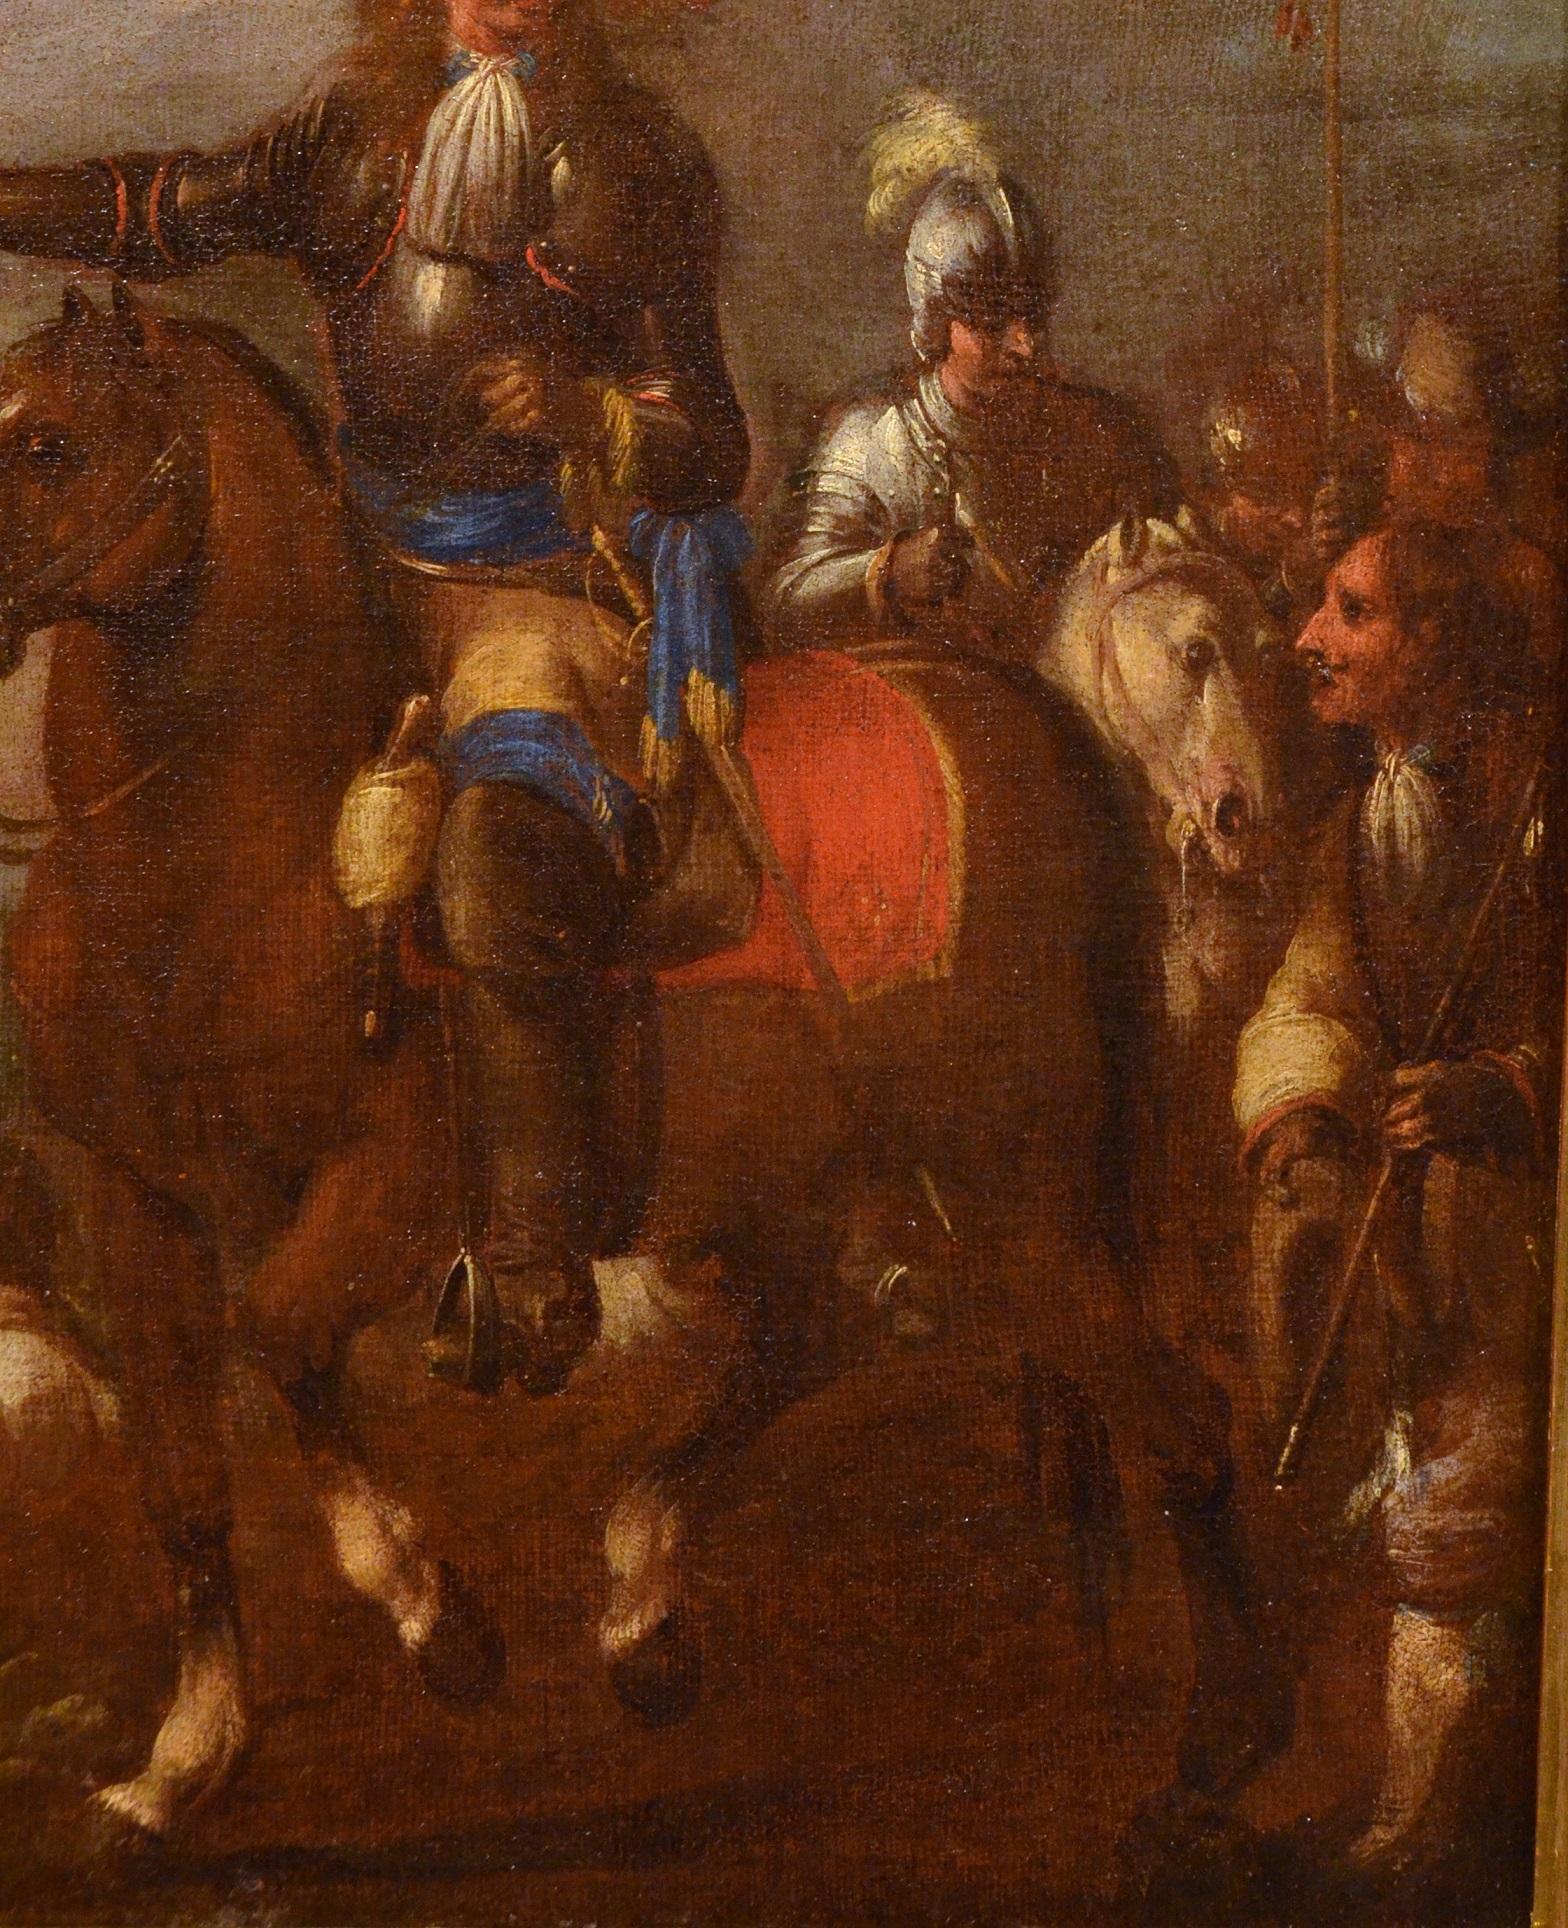 Knights Battle Paint Oil on canvas 17/18th Century Italy Landscape Old master For Sale 7